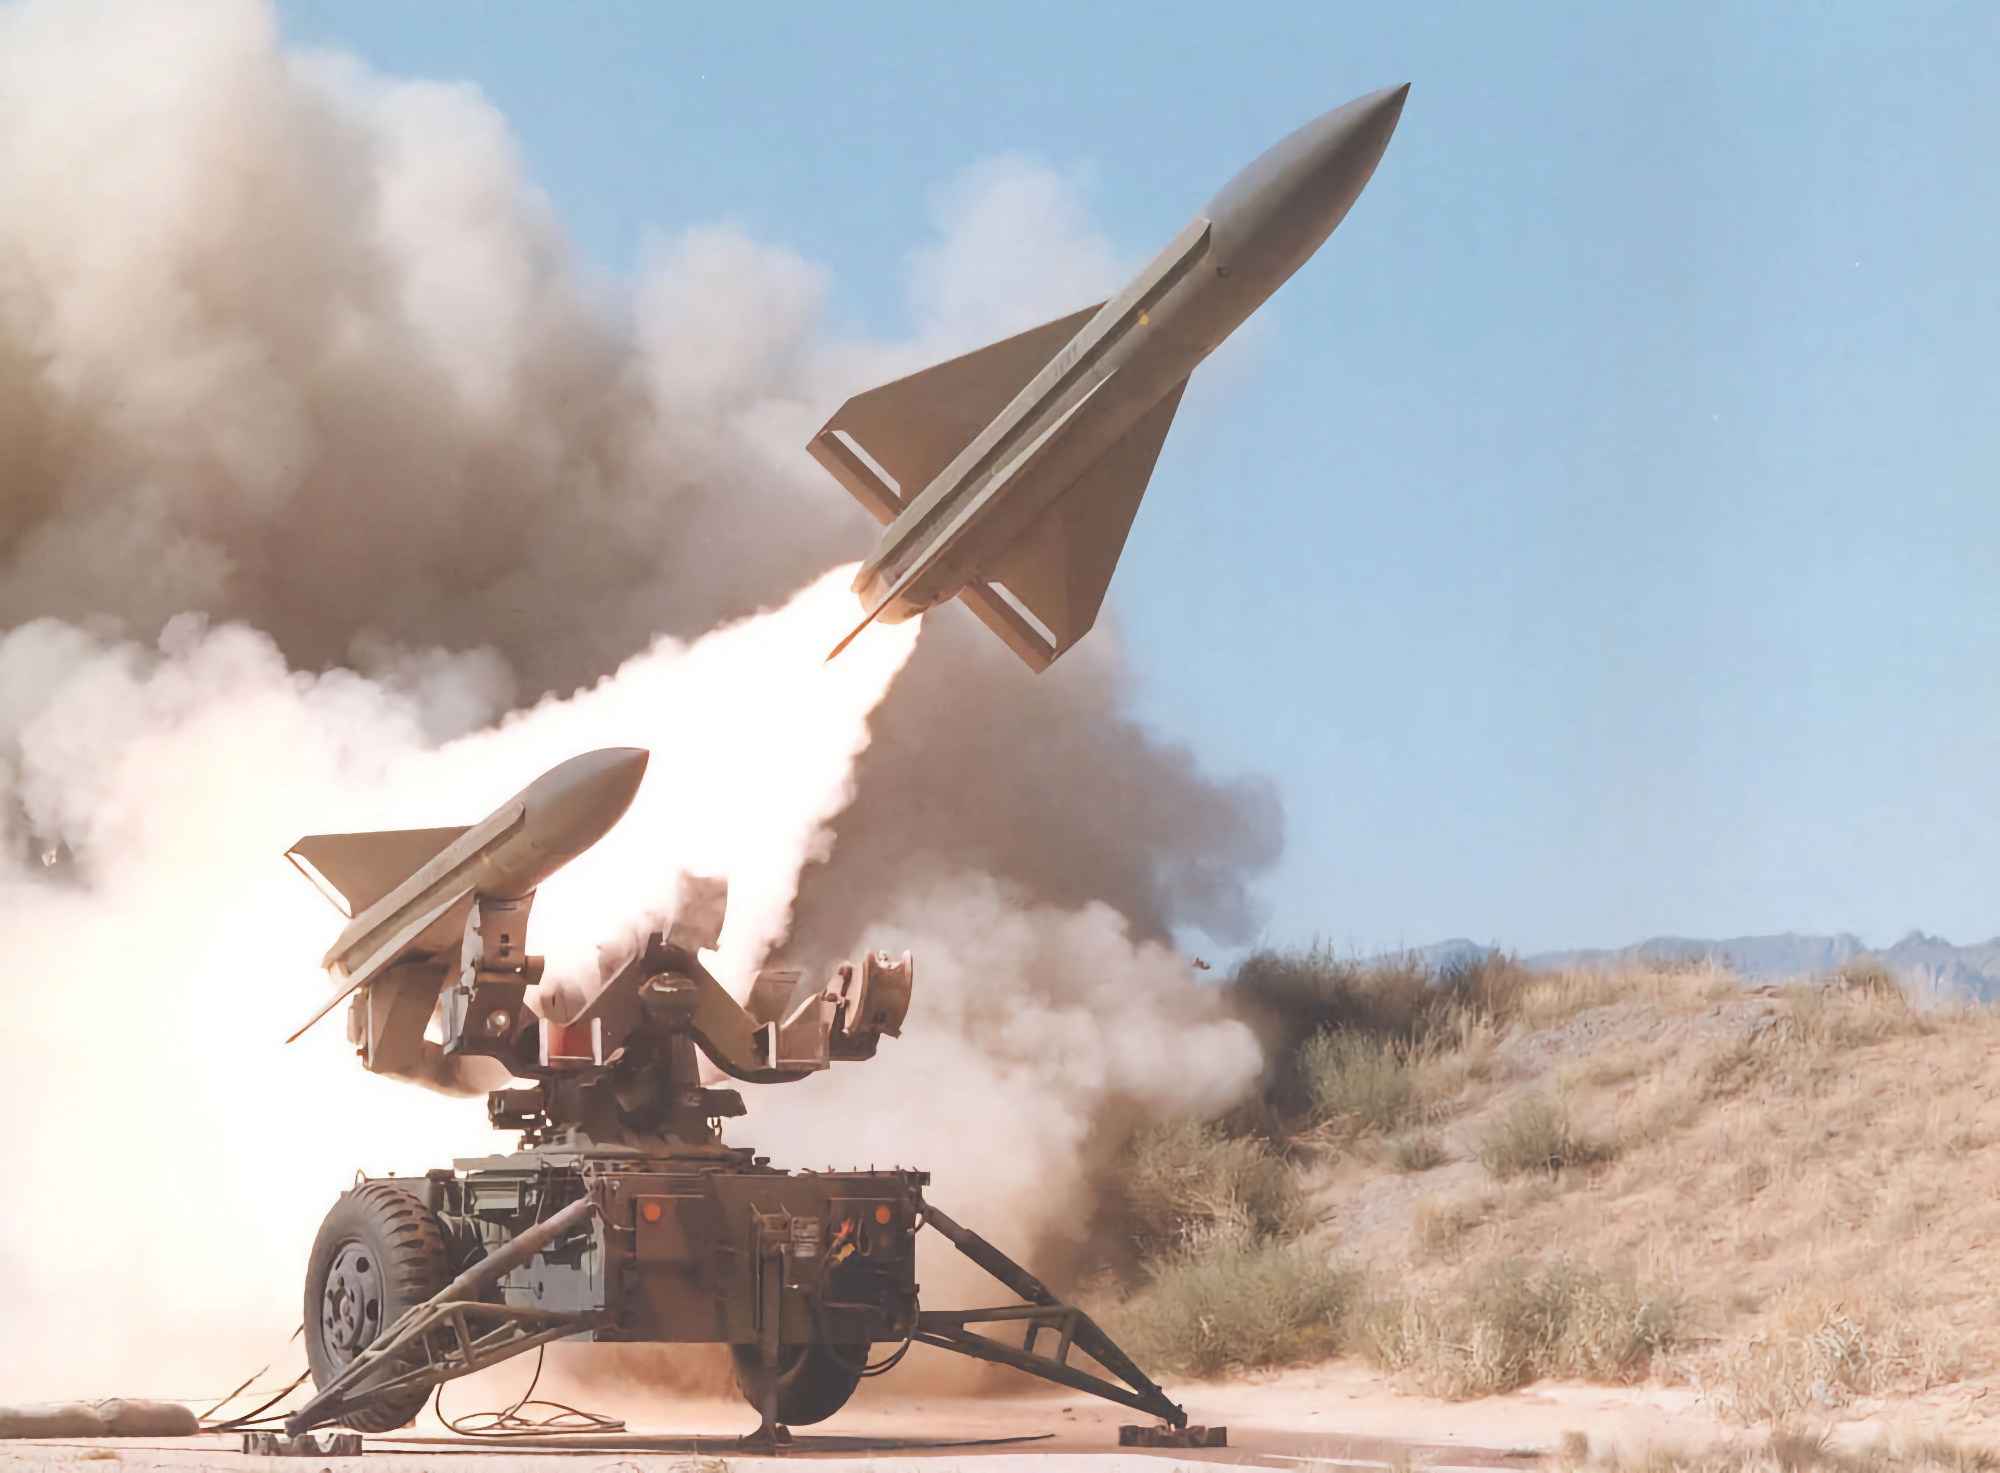 Spain to transfer additional battery of MIM-23 Hawk surface-to-air missile system to Ukraine